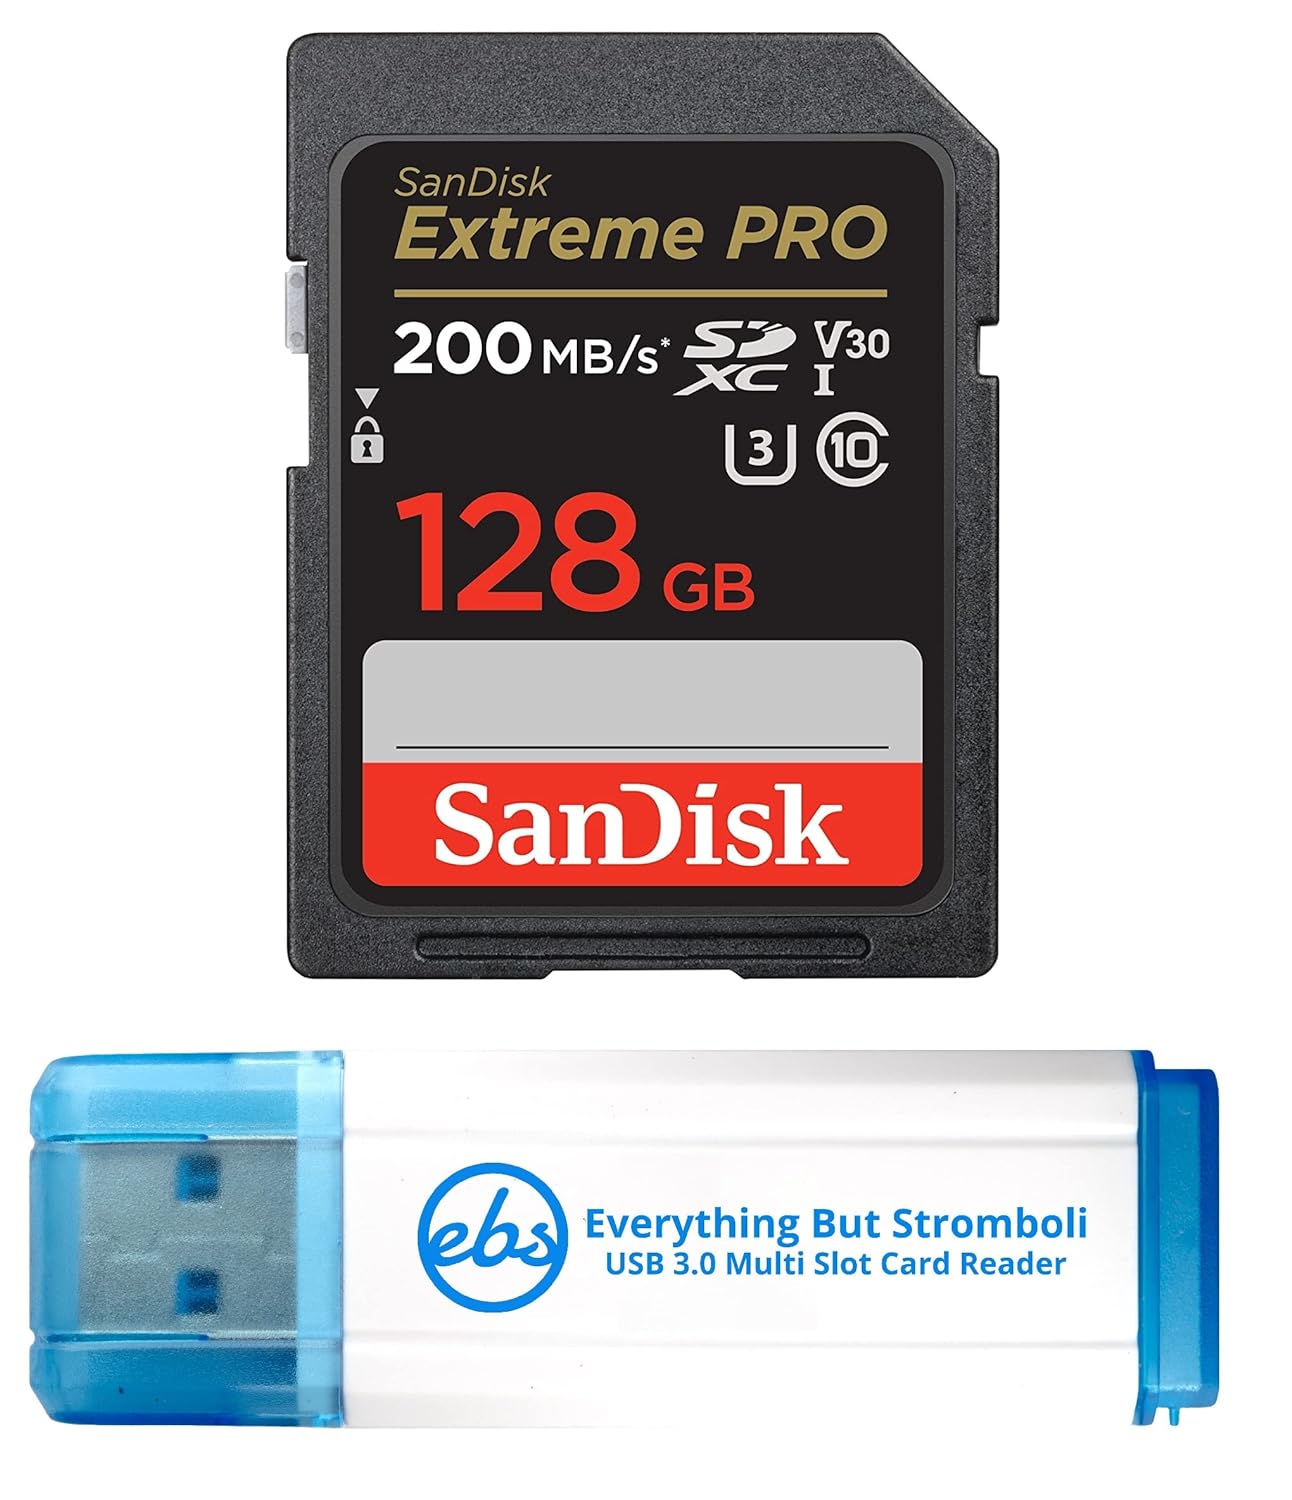 SanDisk 128GB SD Extreme Pro Memory Card Works with Sony Alpha a6400 Mirrorless Camera (ILCE-6400/B) 4K V30 U3 (SDSDXXD-128G-GN4IN) Bundle with 1 Everything But Stromboli 3.0 Micro & SD Card Reader